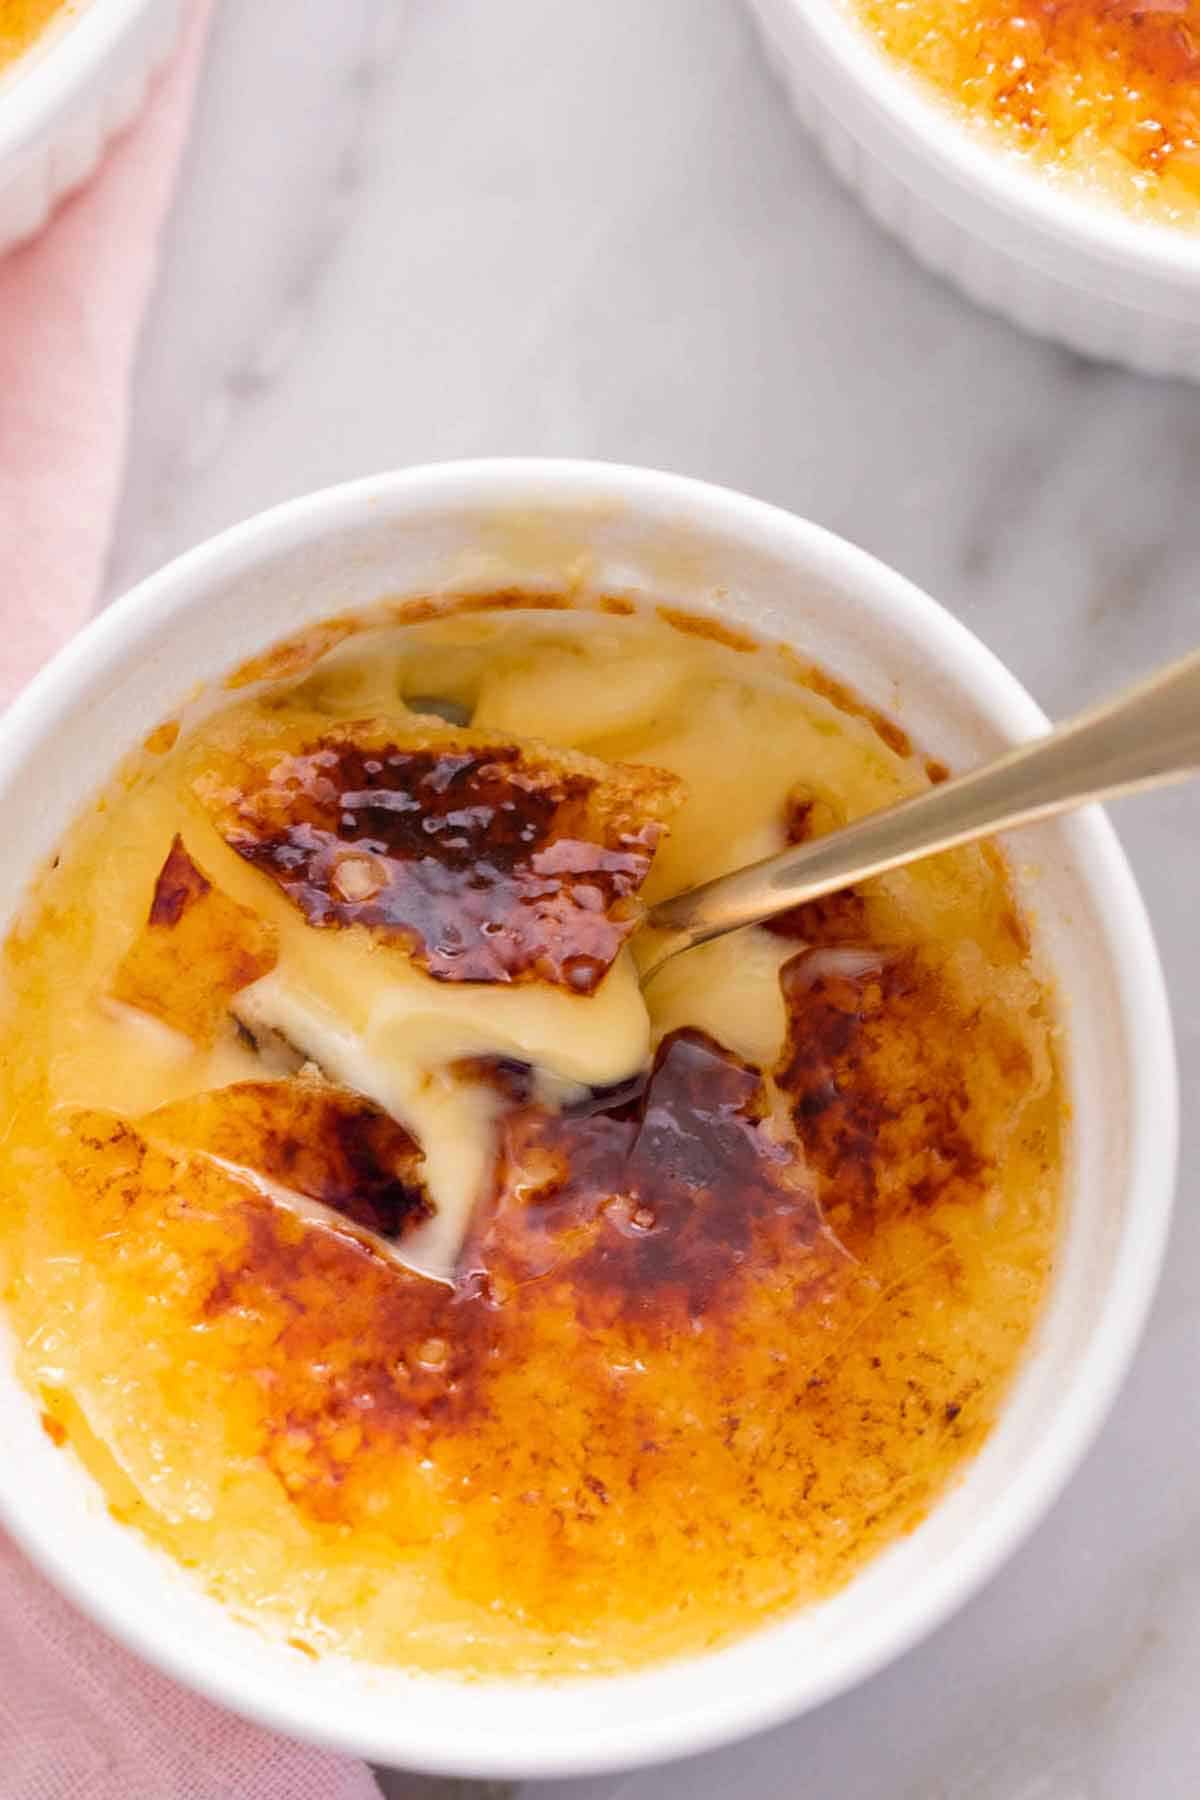 Overhead view of a crème brûlée, top is cracked, with a spoon inside.